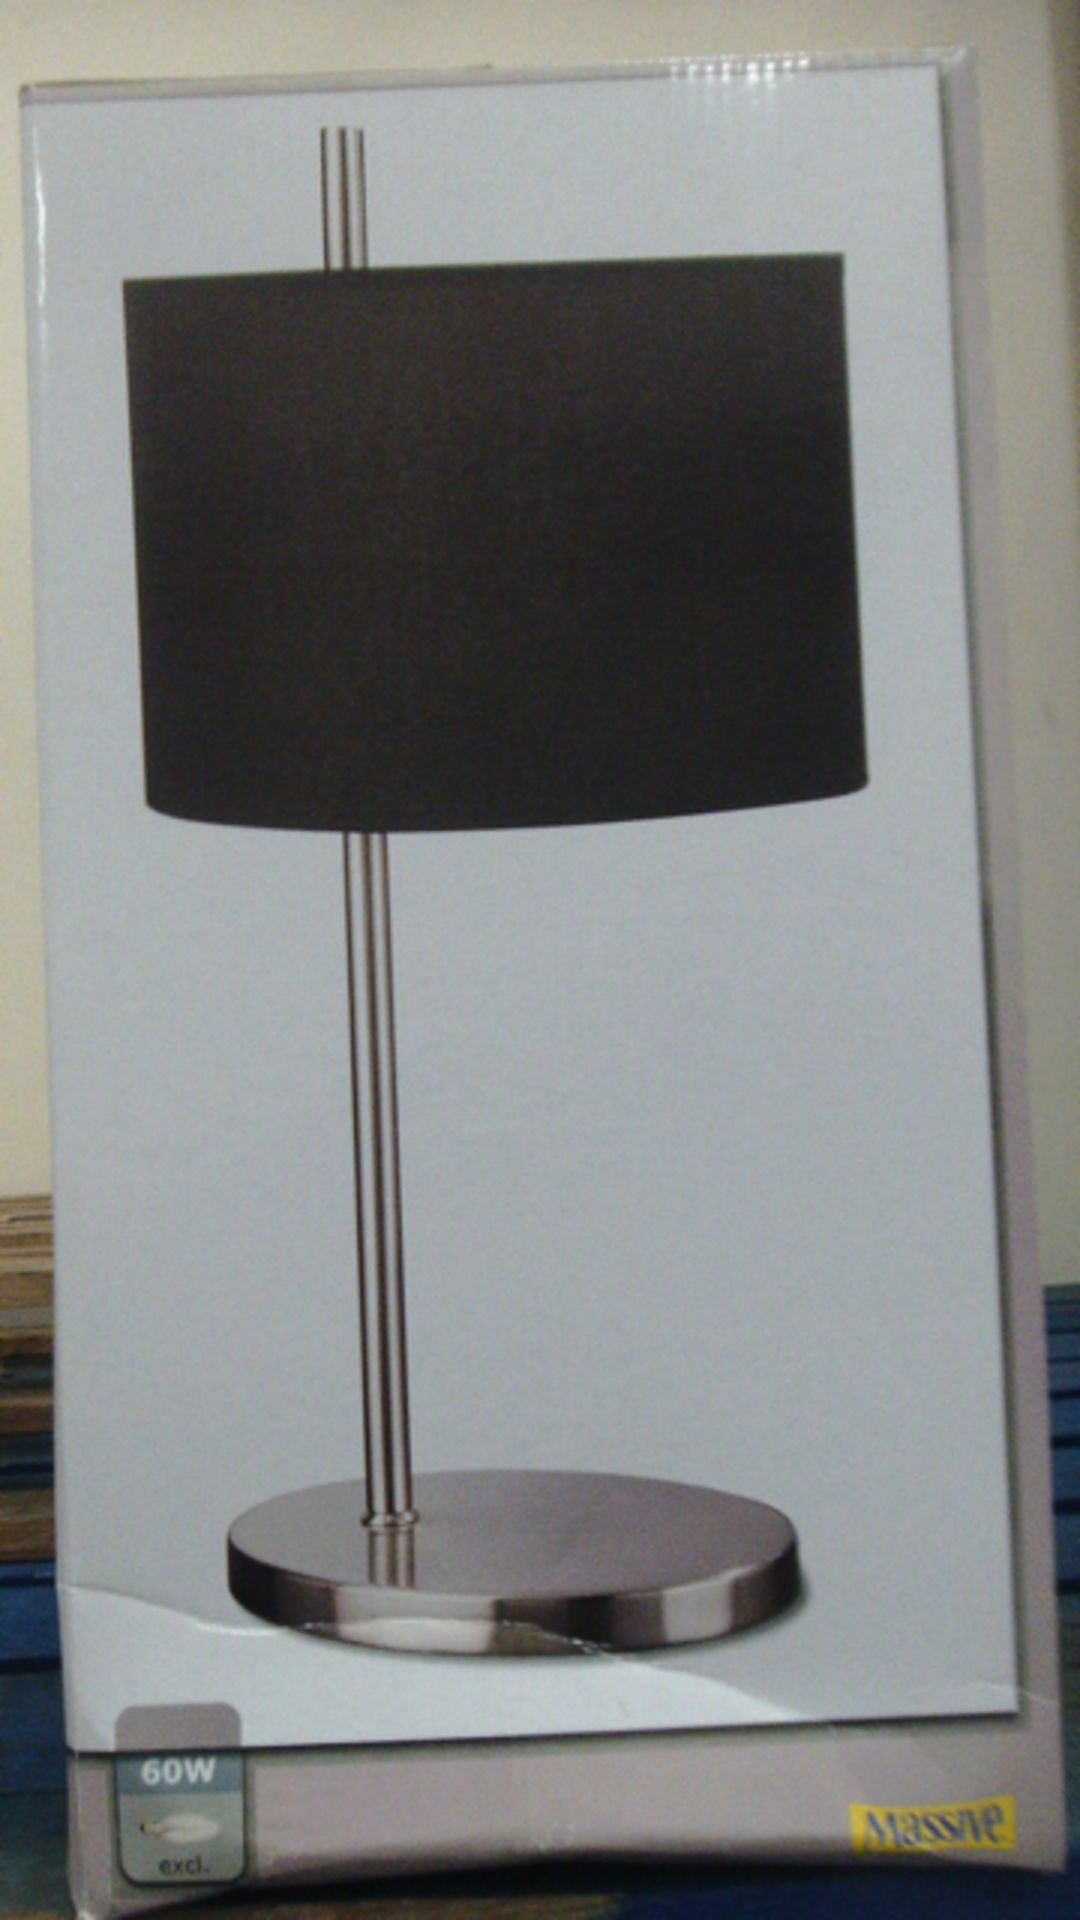 7pcs x Brand new Philips Table lamp - 60 W - rrp £49.99 each